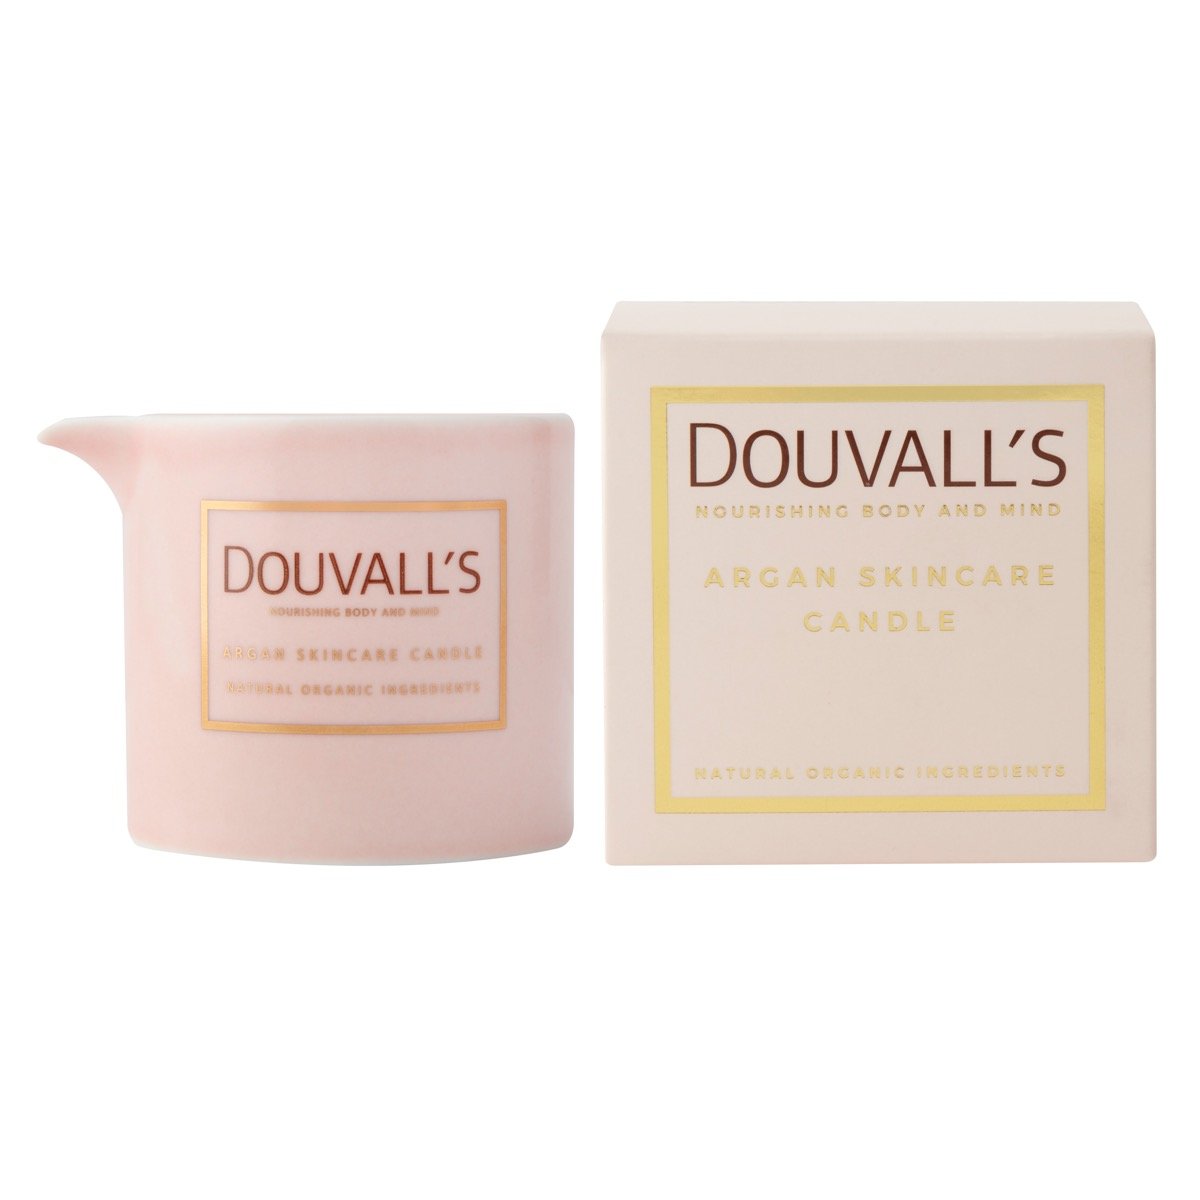 douvalls_candle_f_1.jpg